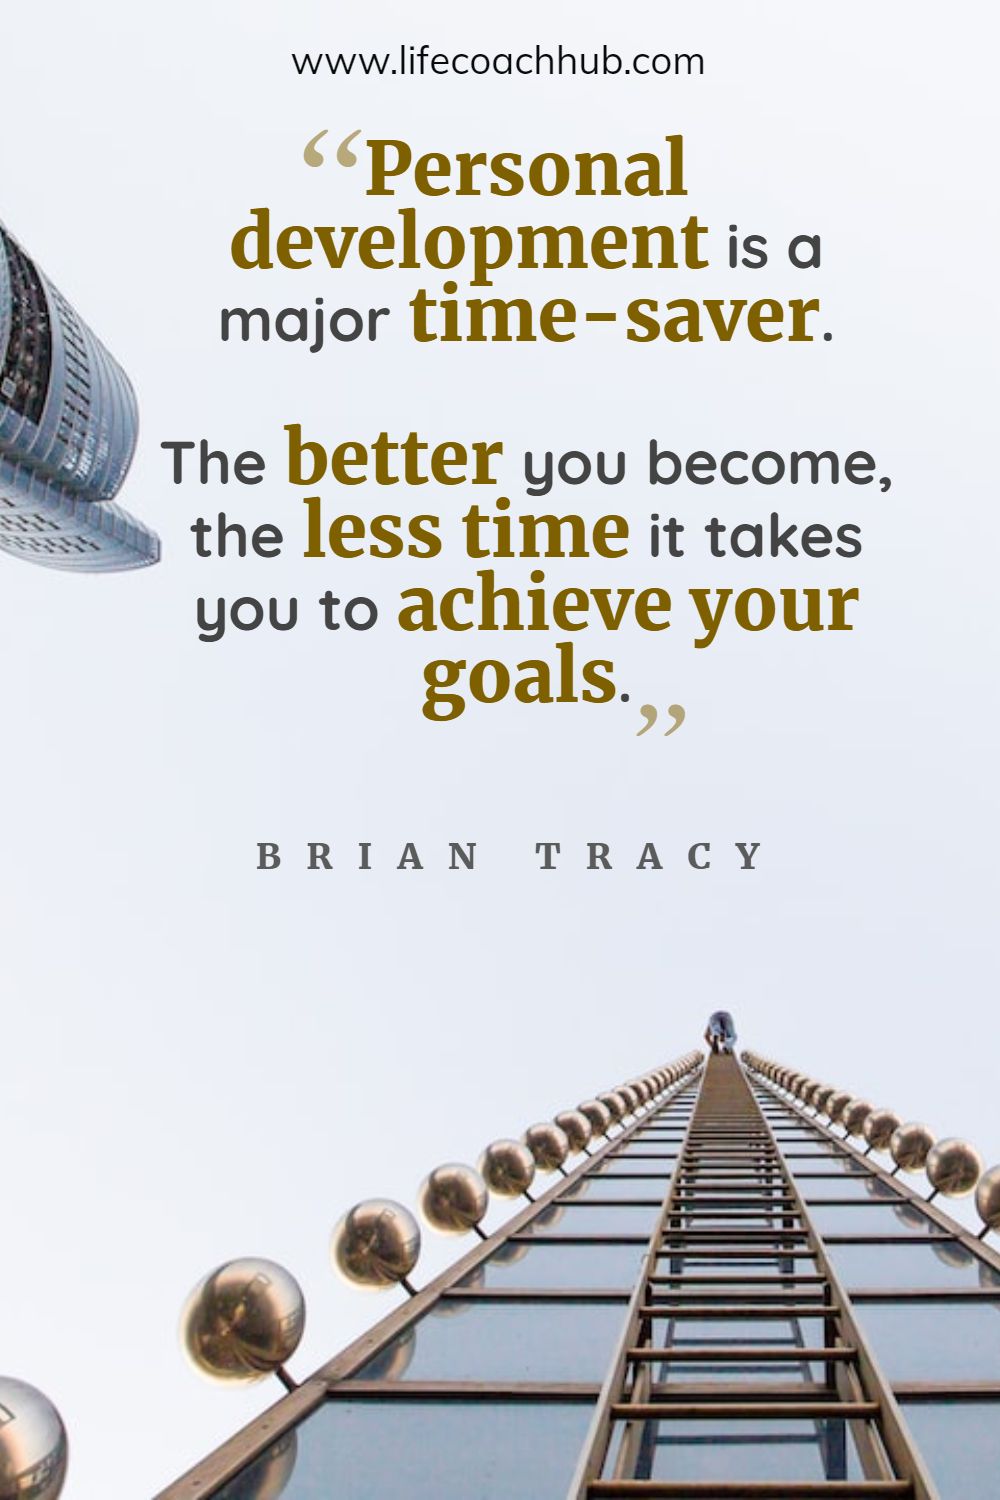 Personal development is a major time-saver. The better you become, the less time it takes you to achieve your goals. Brian Tracy Coaching Quote